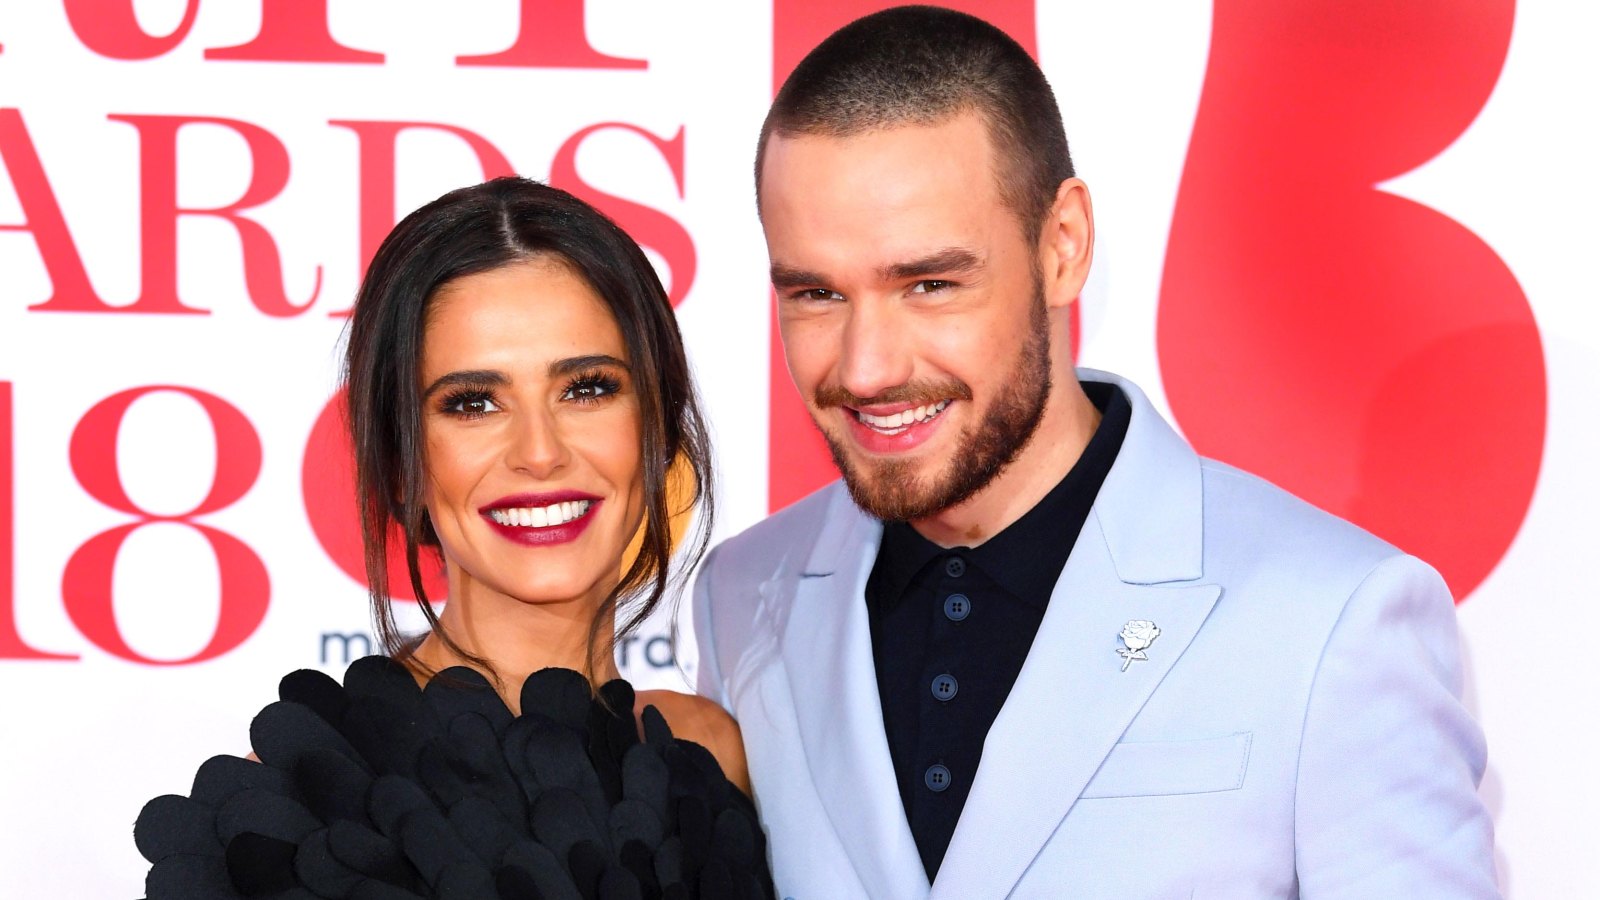 Liam Payne Pays Tribute to Ex Cheryl Cole for U.K. Mother's Day: 'Thank You for Showing My Son All the Love in the World'